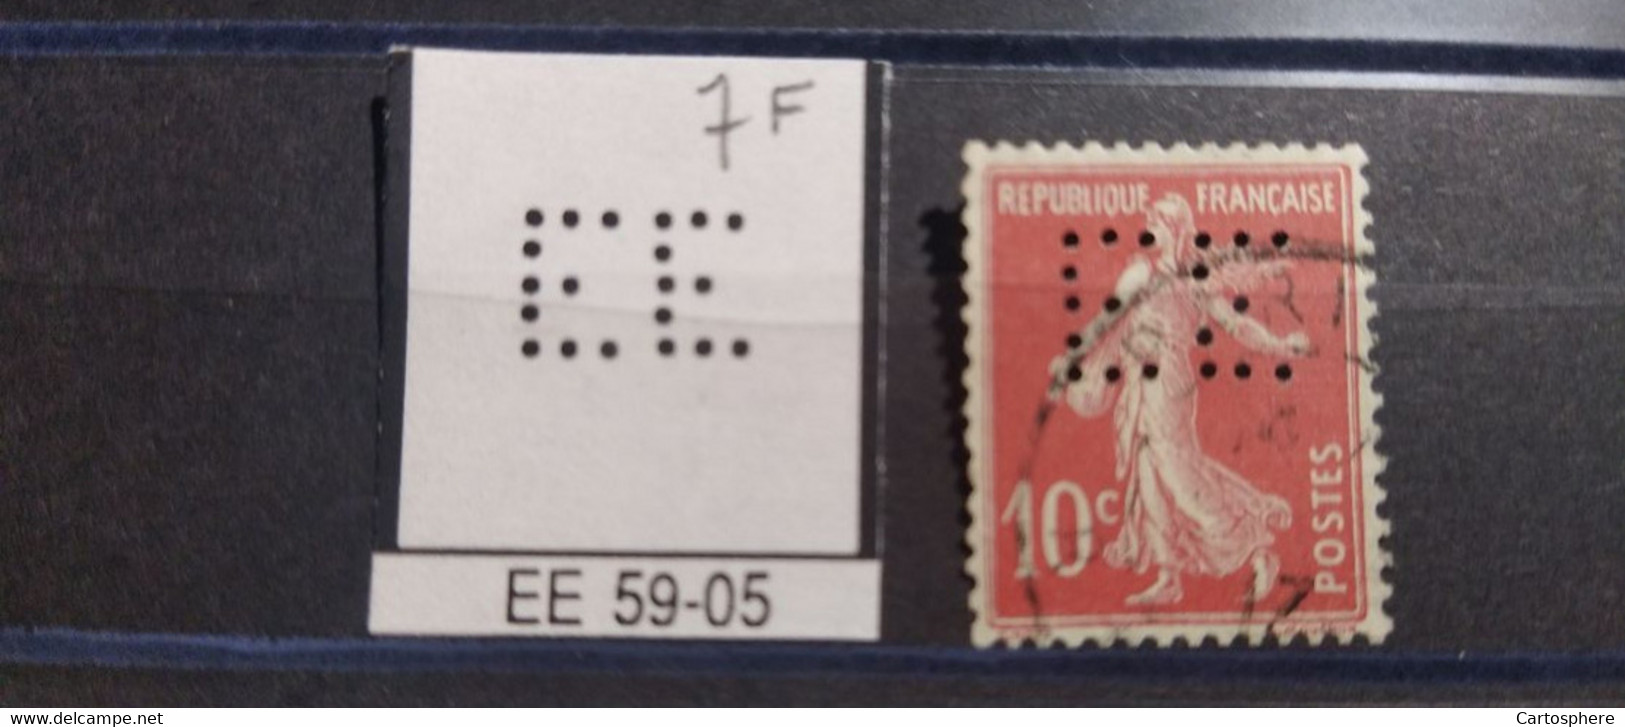 FRANCE E.E 59-5 TIMBRE EE 59-05  INDICE 7 SUR 138 DIMENSION PERFORE PERFORES PERFIN PERFINS PERFO PERFORATION PERFORIERT - Used Stamps